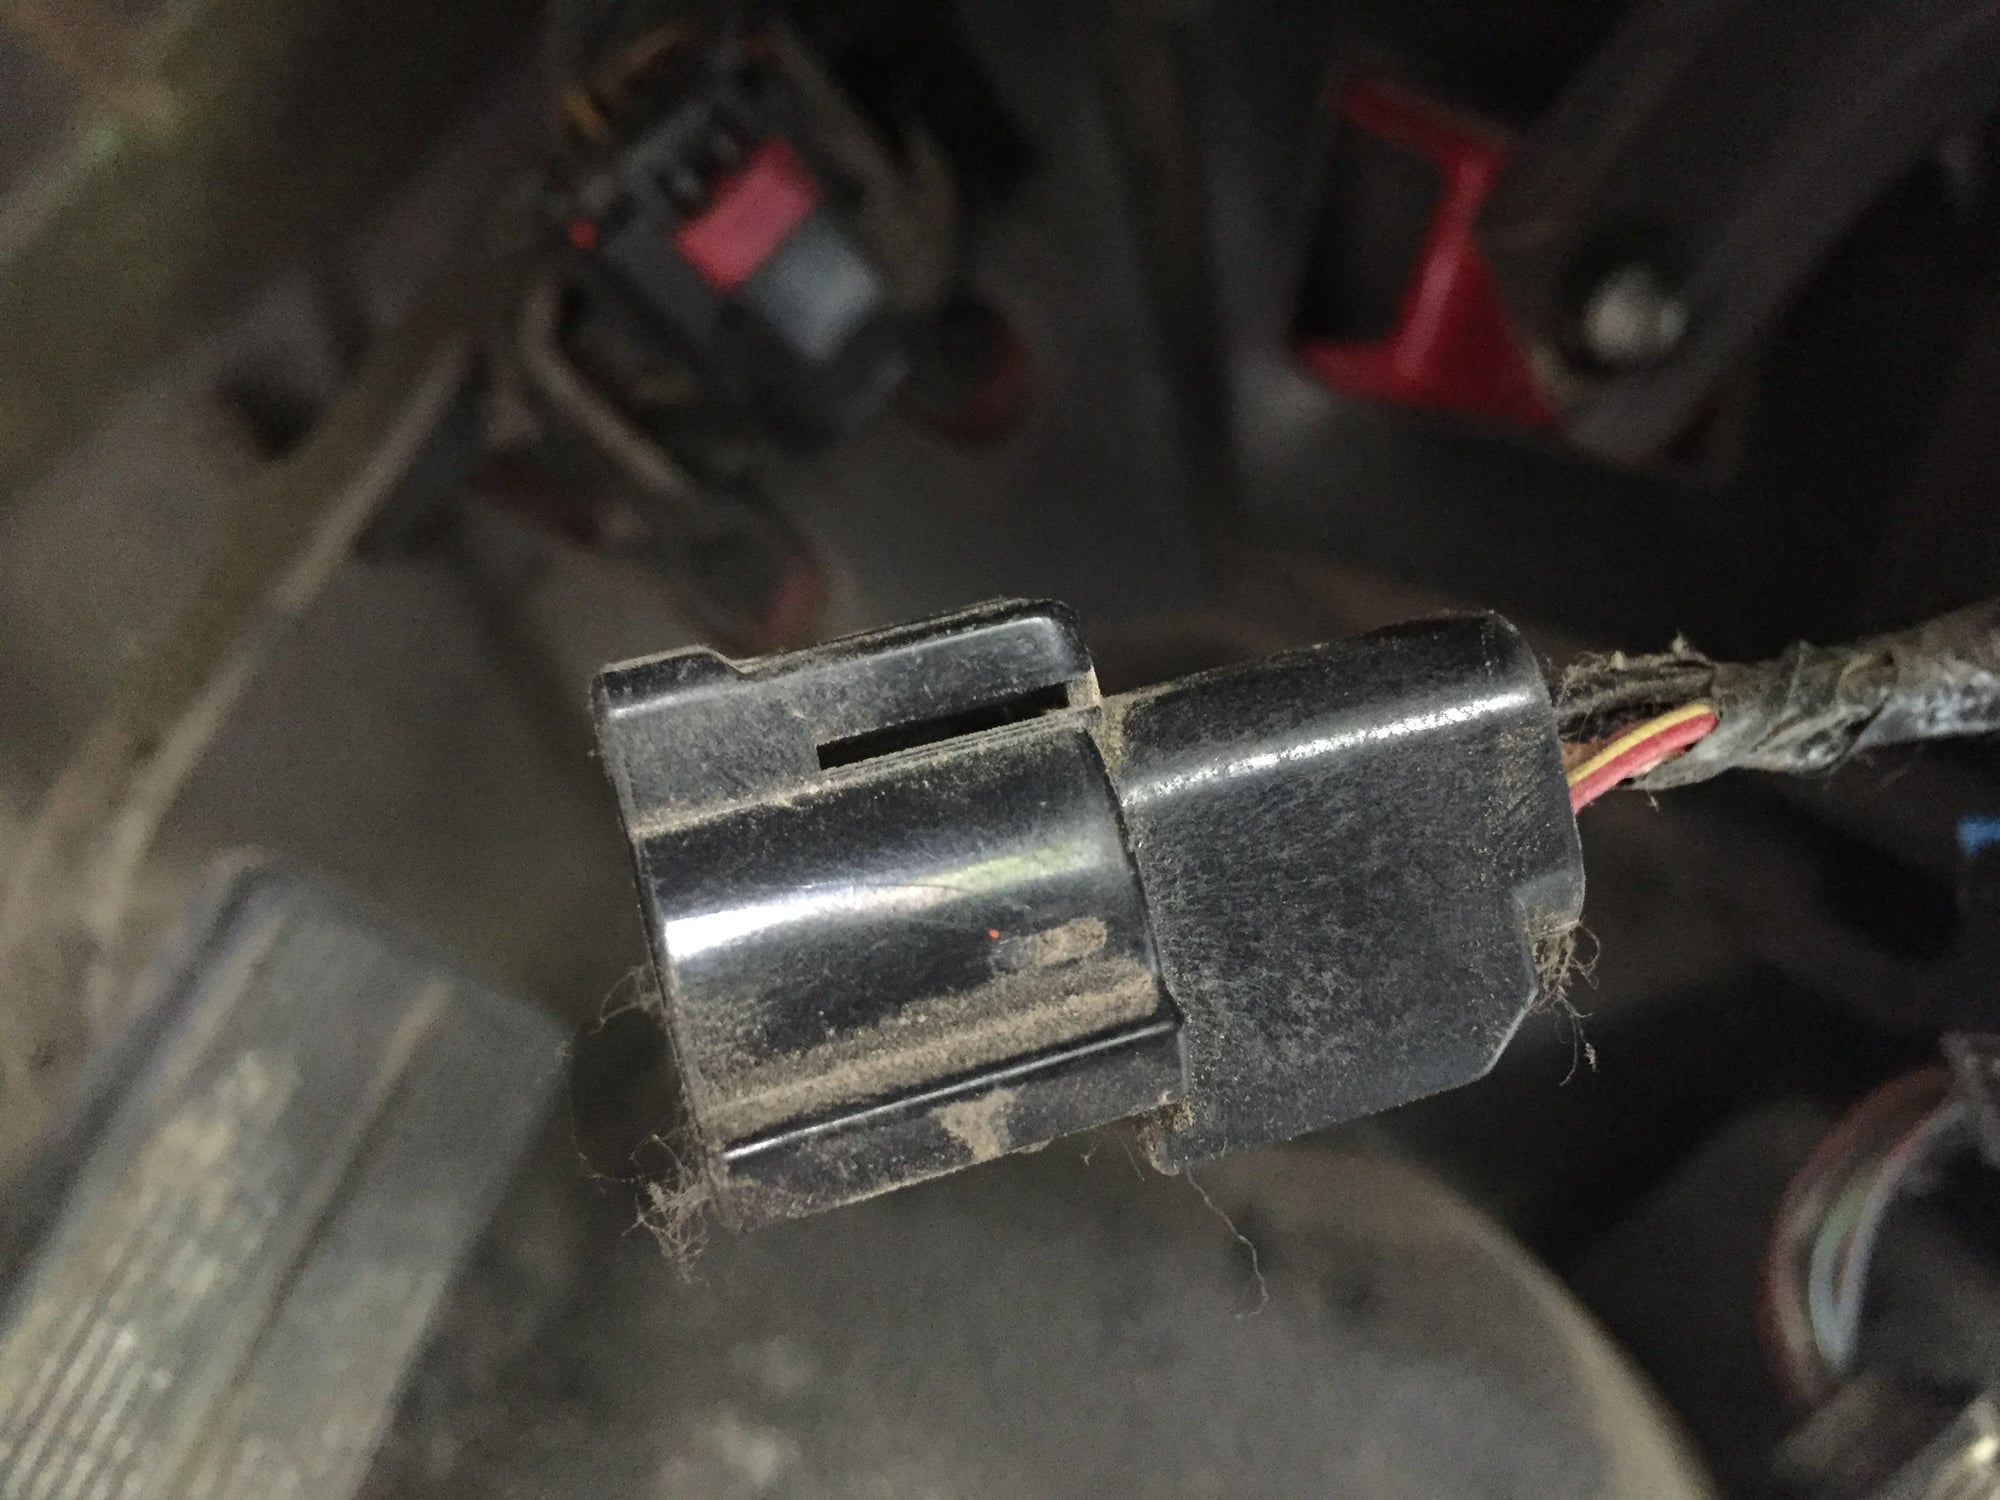 Brake Controller for 2002 F550 Dump Truck - Ford Truck Enthusiasts Forums